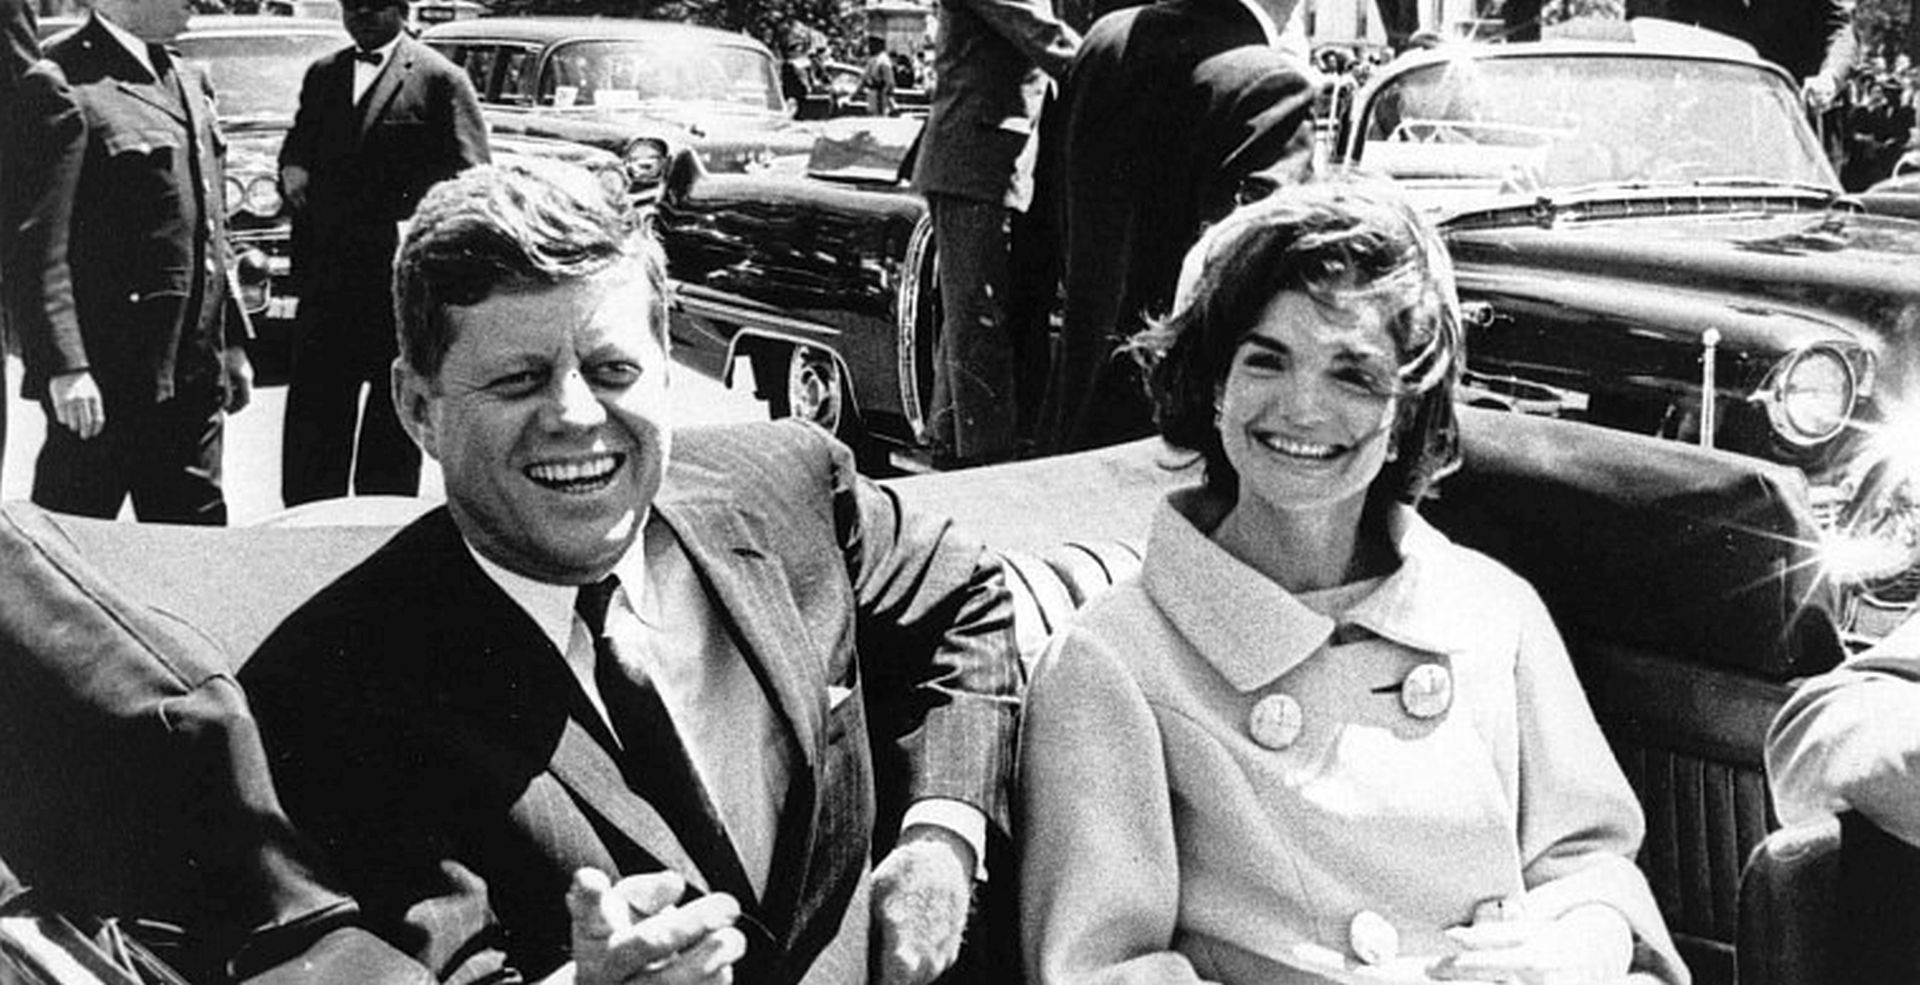 epa06291633 (FILE) - A handout photo made available by John F. Kennedy presidential Library shows US President John F. Kennedy (L) and First Lady Jacqueline Kennedy (R) following arrival ceremonies for H. E. Habib Bourguiba, President of Tunisia, at Blair House, in Washington, D.C., USA, 03 May 1961 (issued 26 October 2017). The classified files on the assassination of former US Pesident John F Kennedy will be on 26 October, US President Donald Trump announced on twitter on 25 October. The US Congress ruled in 1992 that all JFK documents be released within 25 years, unless the US President decides the release would damage national security. John F. Kennedy was shot dead in Dallas in 1963 by Lee Harvey Oswald.  EPA/ABBIE ROWE / NATIONAL PARK SERVICE HANDOUT EDITORIAL USE ONLY/NO SALES HANDOUT EDITORIAL USE ONLY/NO SALES *** Local Caption *** 51102125